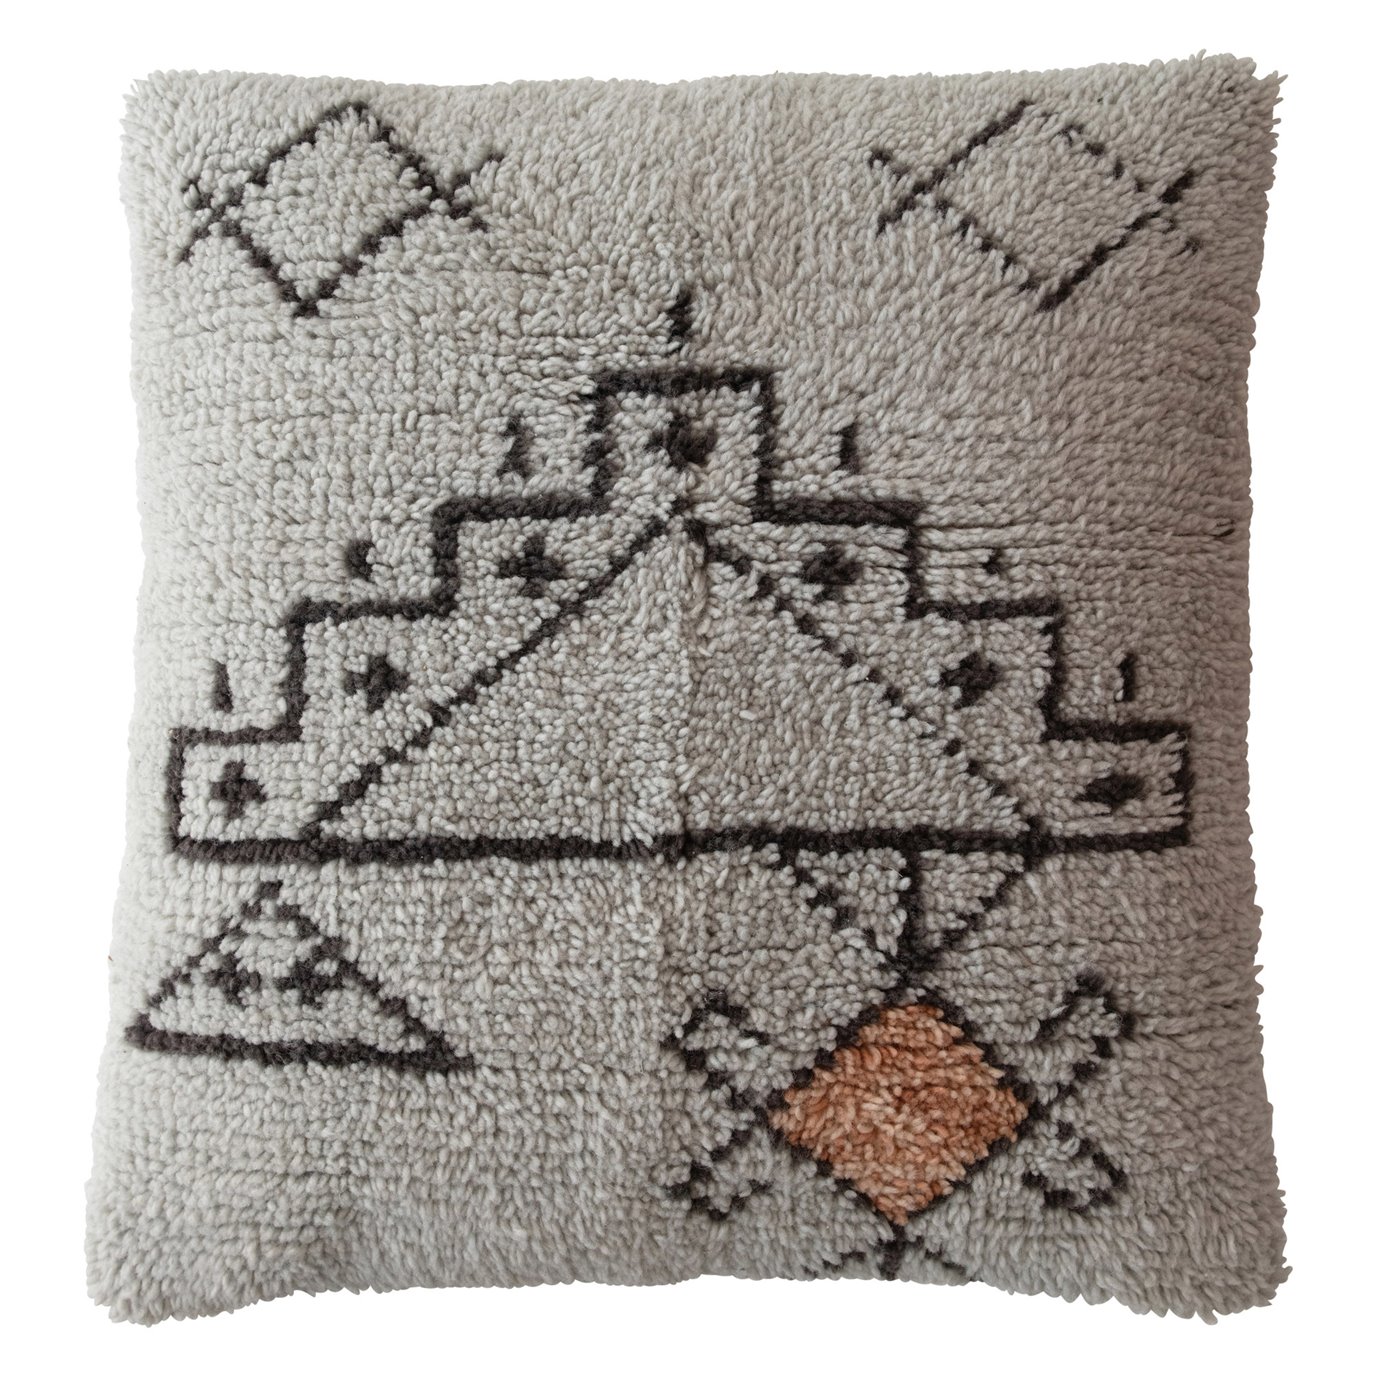 Wool & Cotton Tufted Pillow with Abstract Design, Multi Color